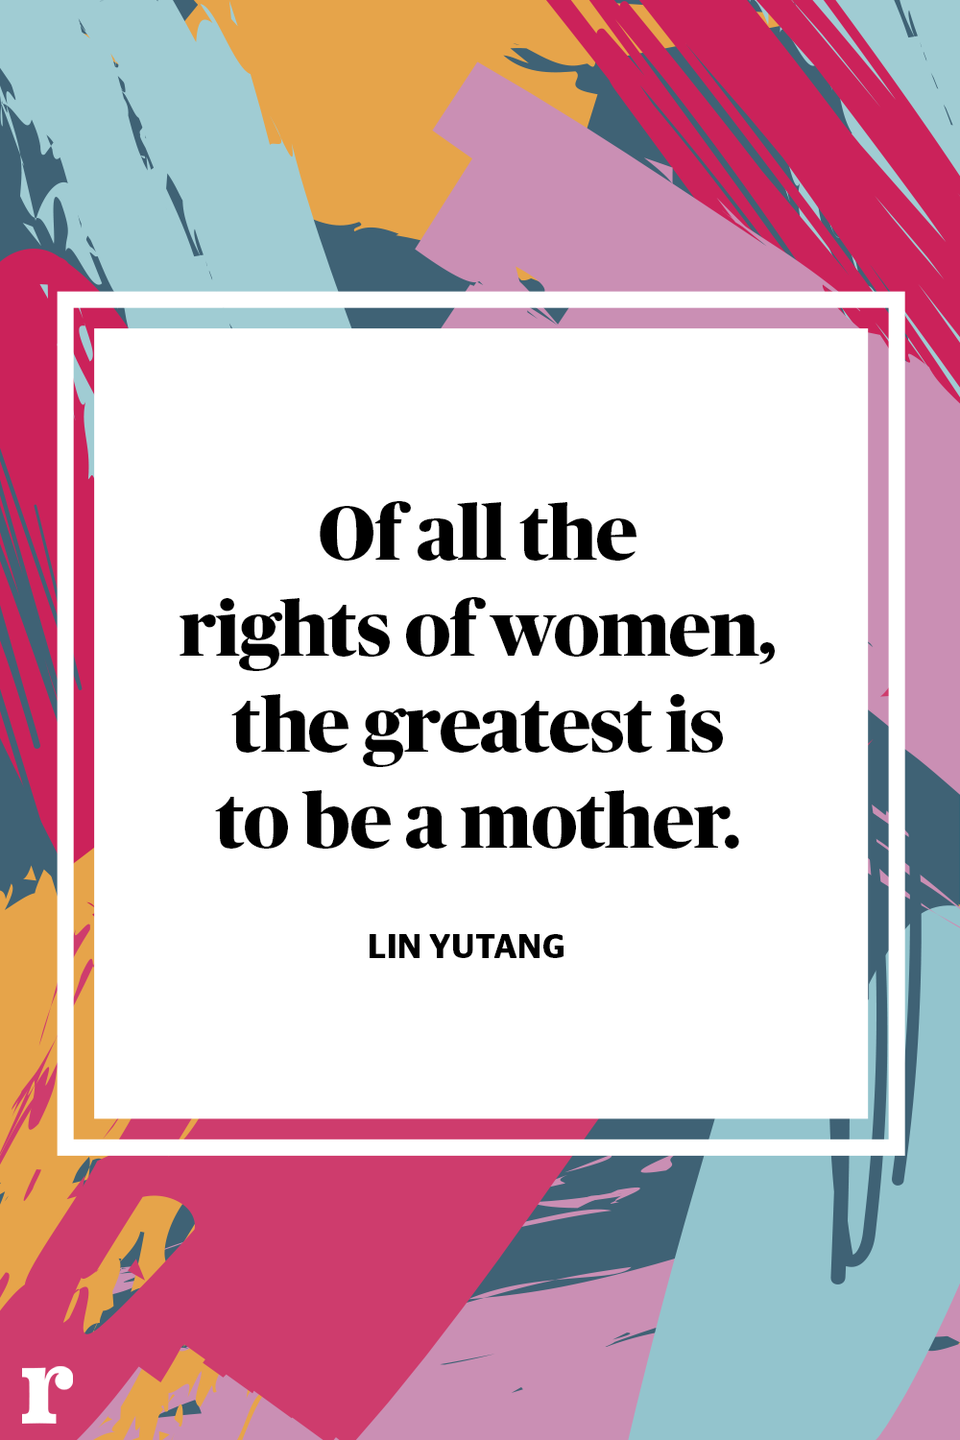 <p>"Of all the rights of women, the greatest is to be a mother." </p><p><em> - Lin Yutang</em></p>